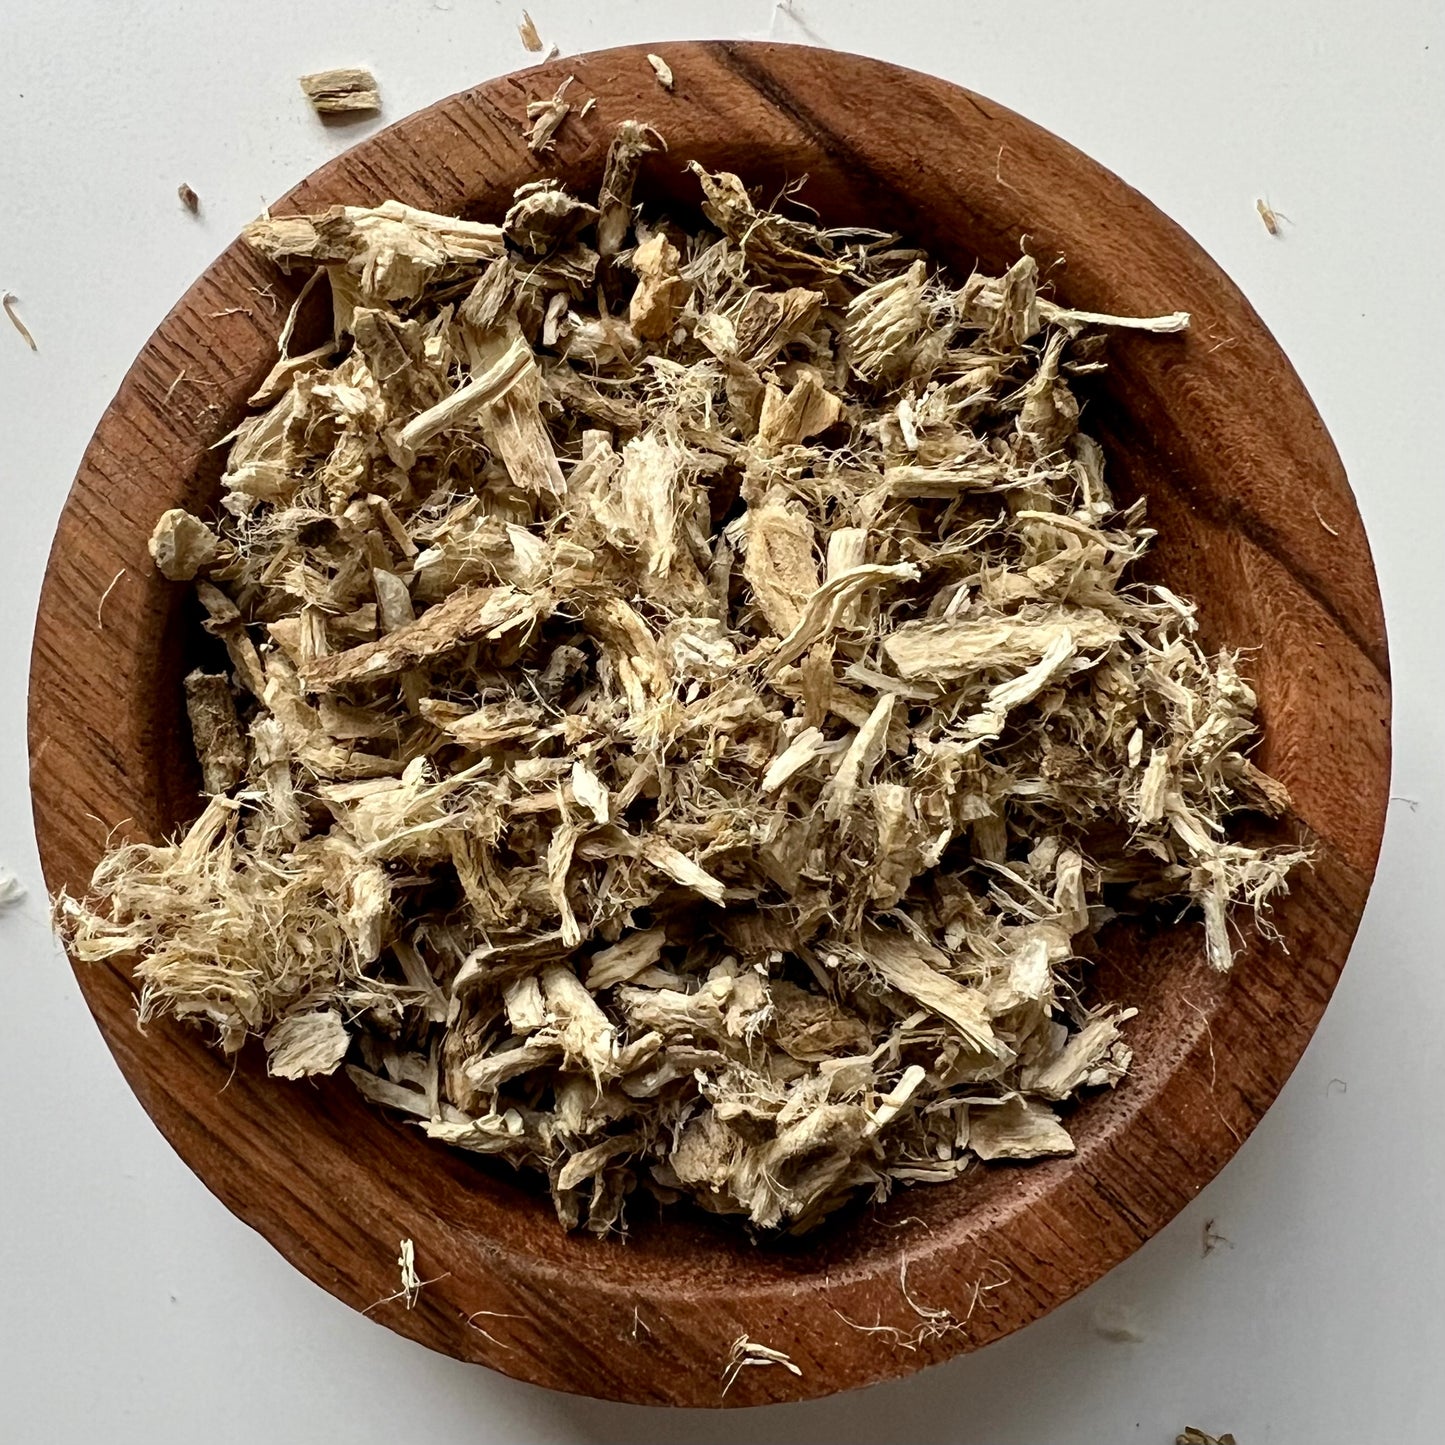 Marshmallow Root 100% Pure Organic Dried Cut and Sifted (Althaea Officinalis)